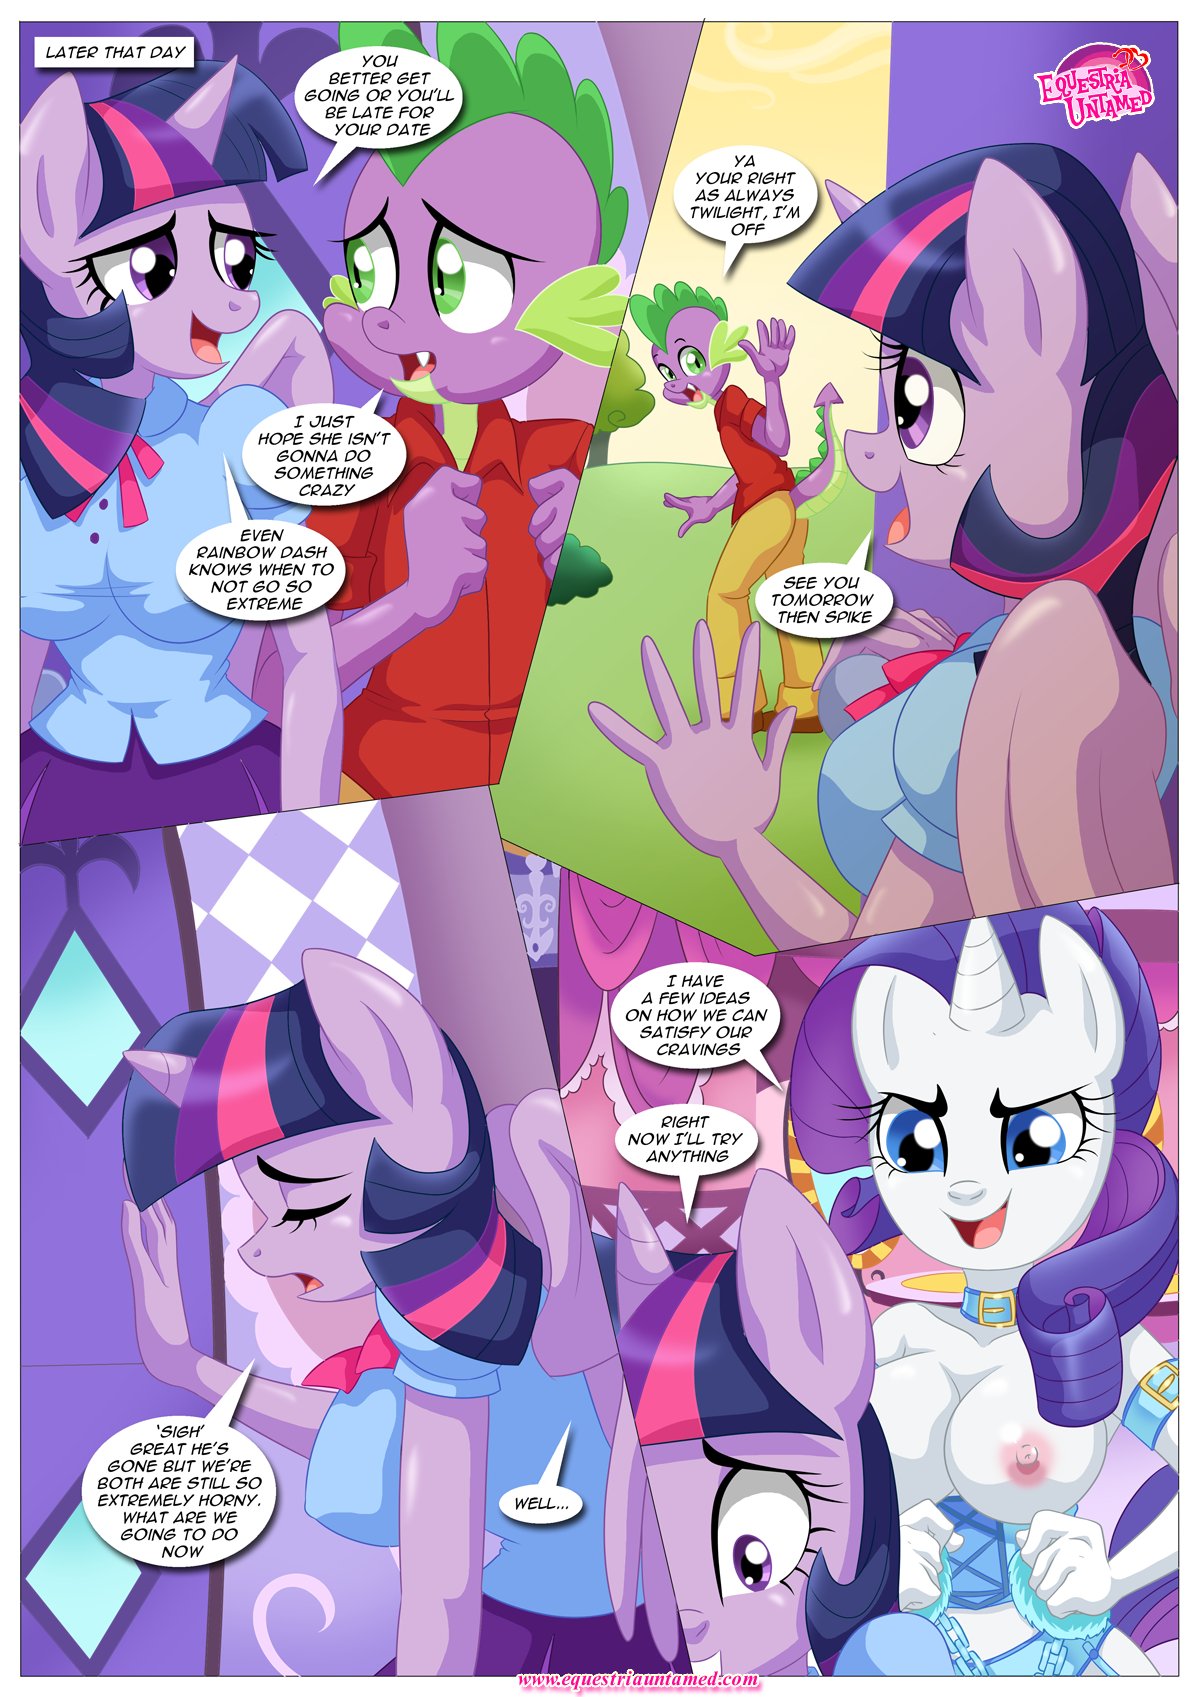 bbmbbf comic equestria_untamed friendship_is_magic my_little_pony palcomix rainbow_dash's_game_of_extreme_pda rarity rarity_(mlp) spike spike_(mlp) text twilight_sparkle twilight_sparkle_(mlp)